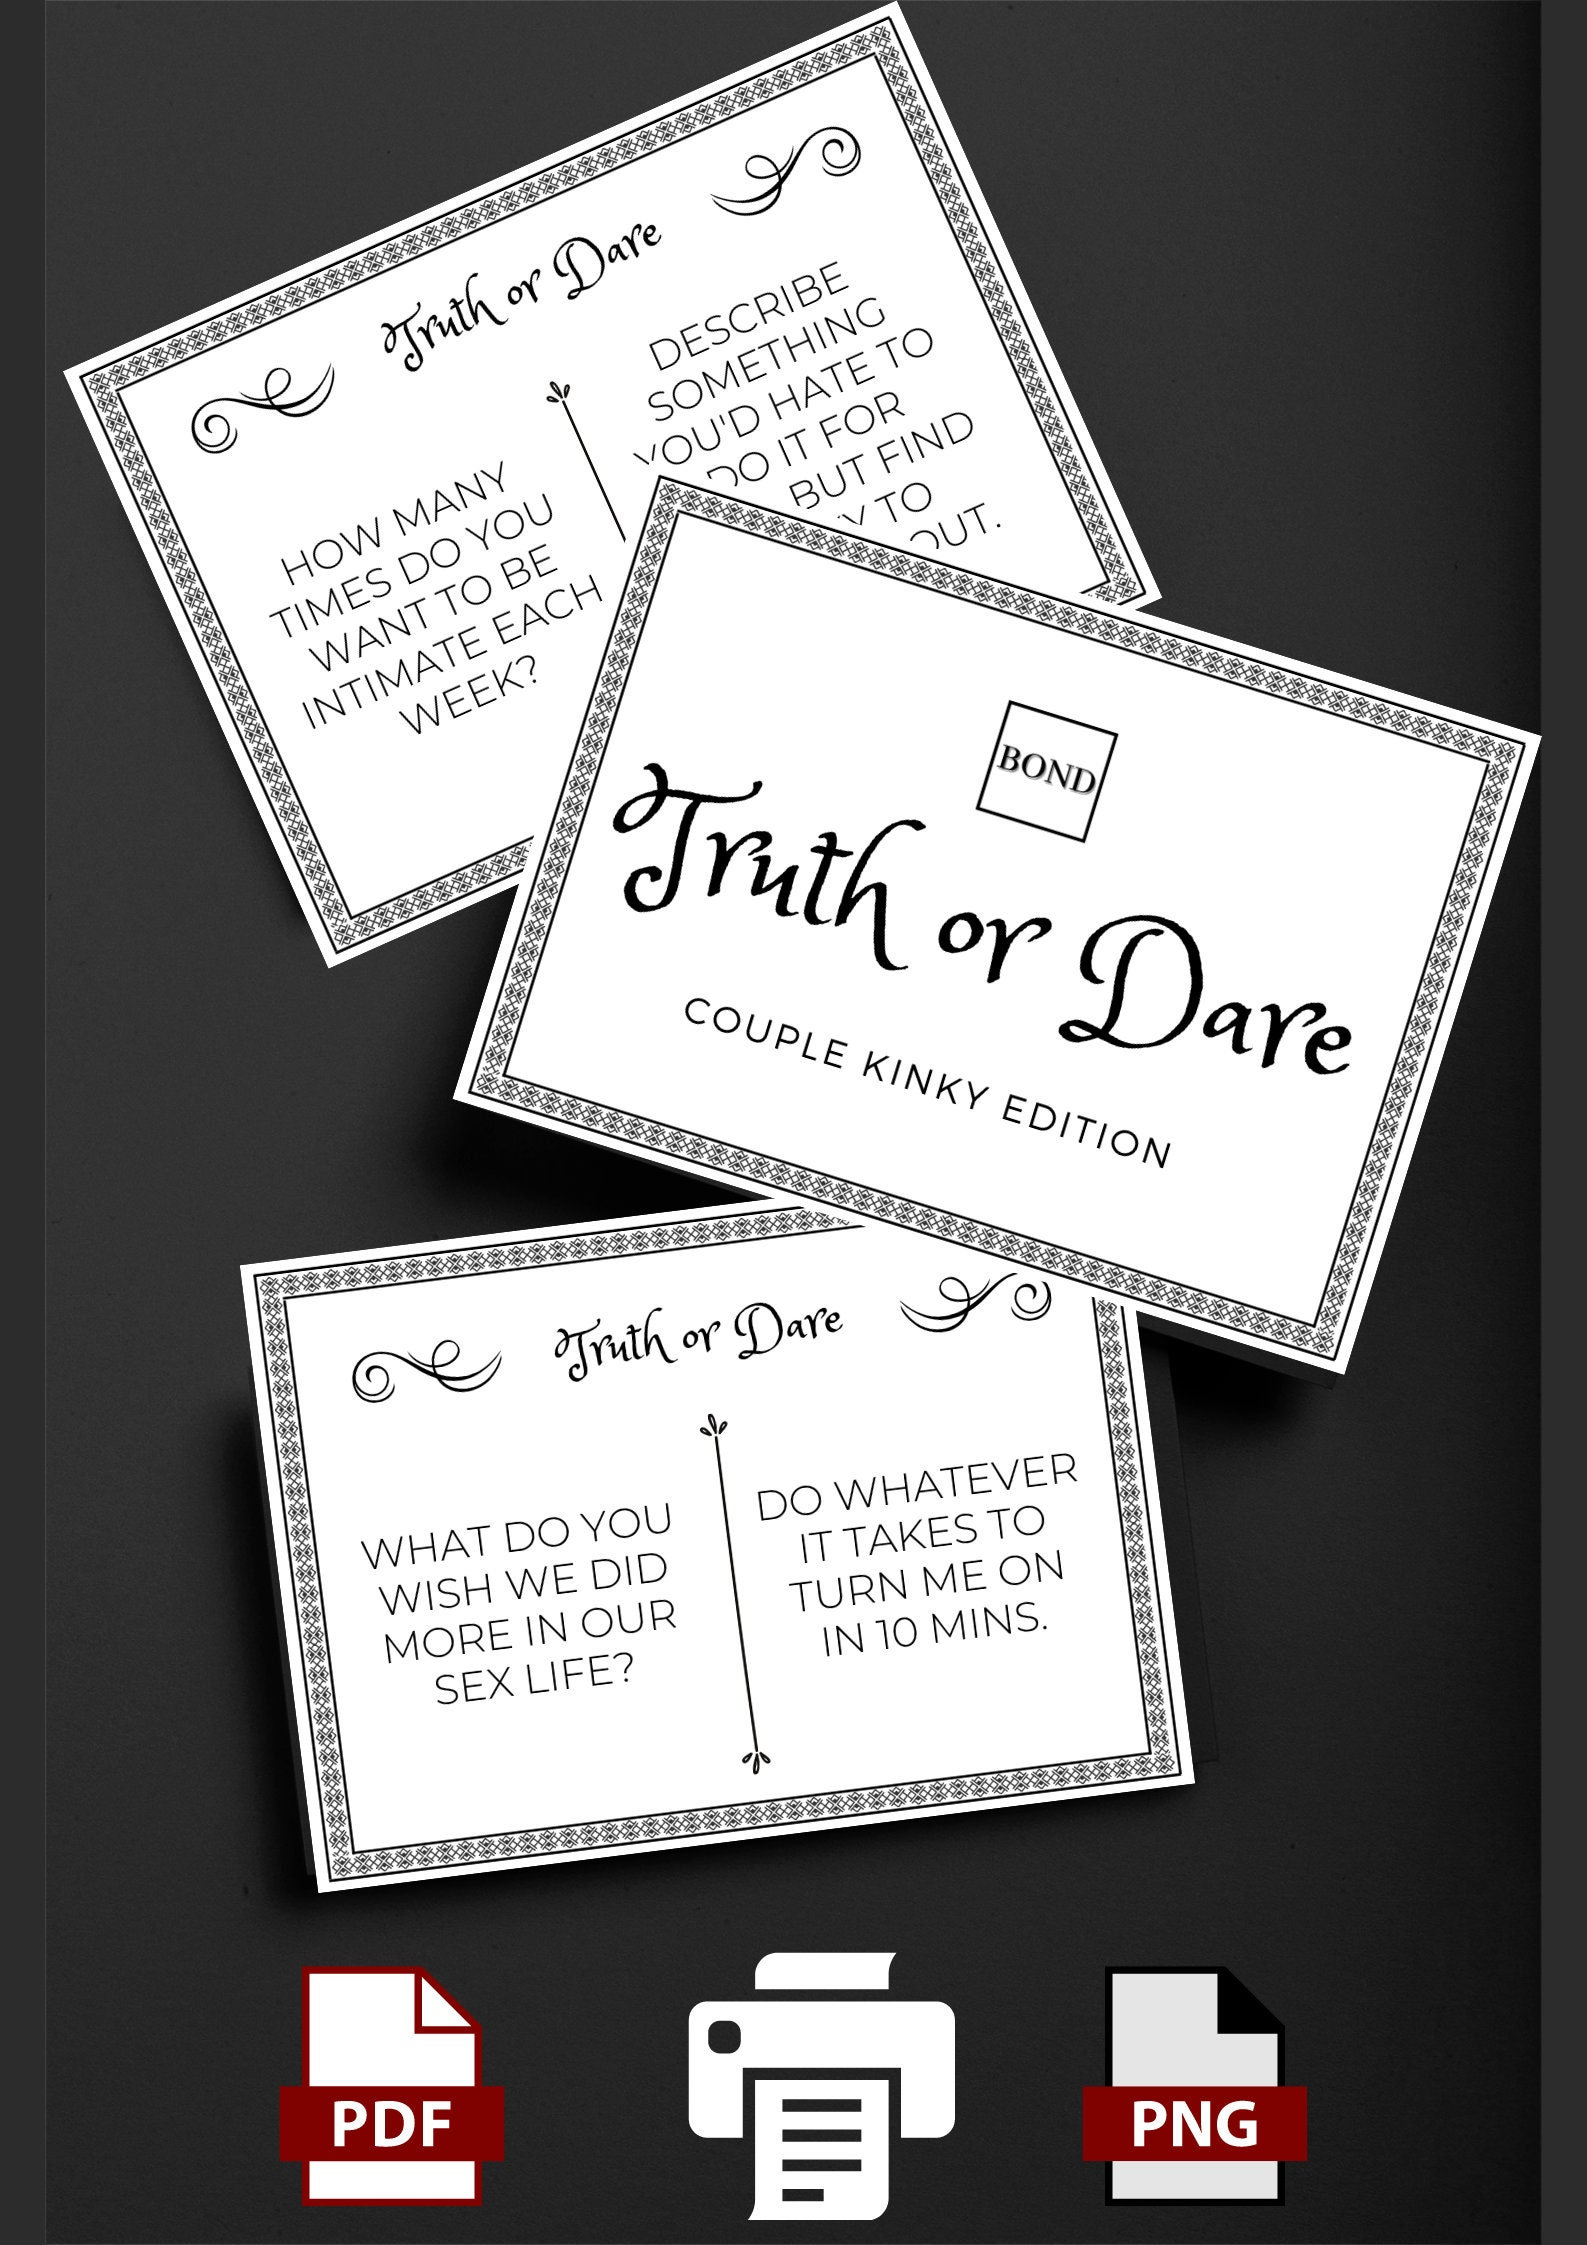 160 Kinky Truth or Dare Adult-themed Couple Card Game Dirty pic